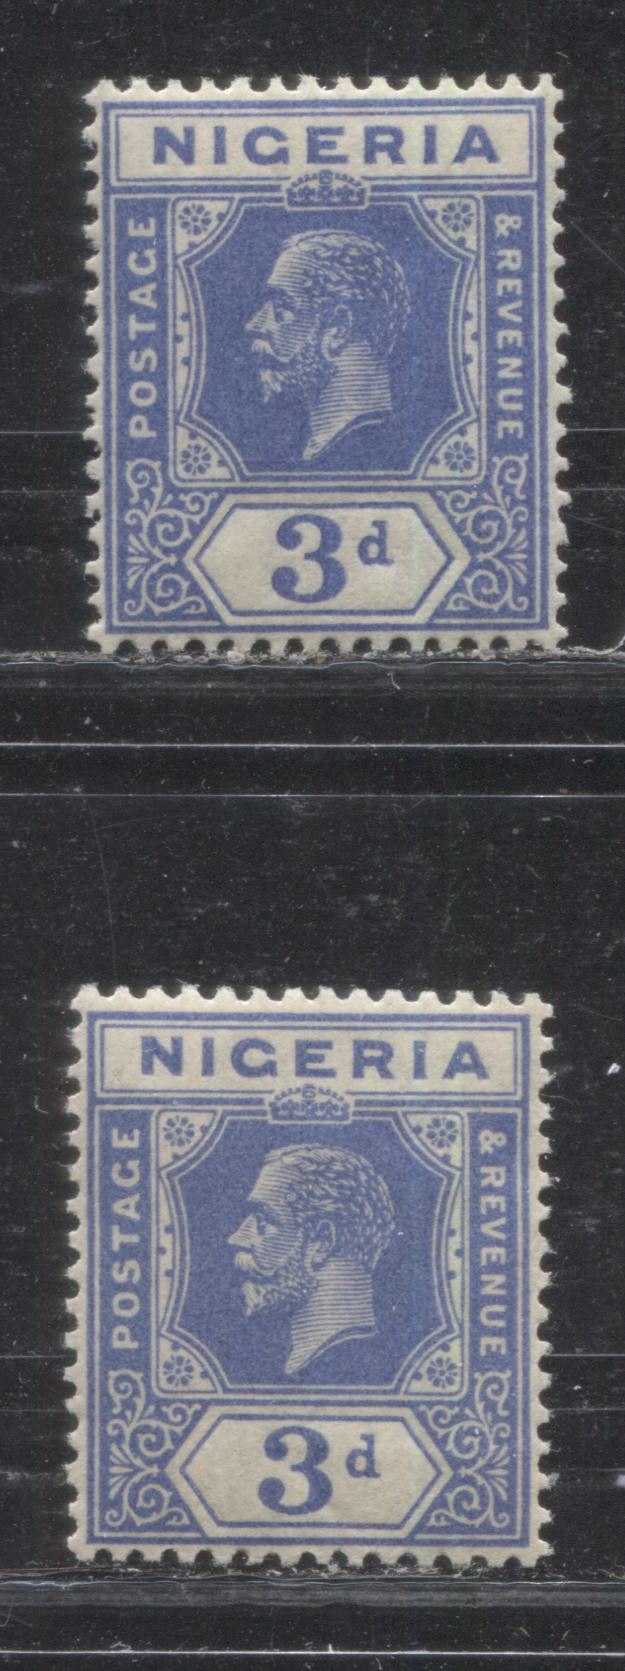 Lot 246 Nigeria SG# 23 3d Blue King George V, 1921-1932 Multiple Script CA Imperium Keyplate Issue, Two VFNH Examples, Die 2, All From Different Printings, With Different Head and Duty Plate Shades